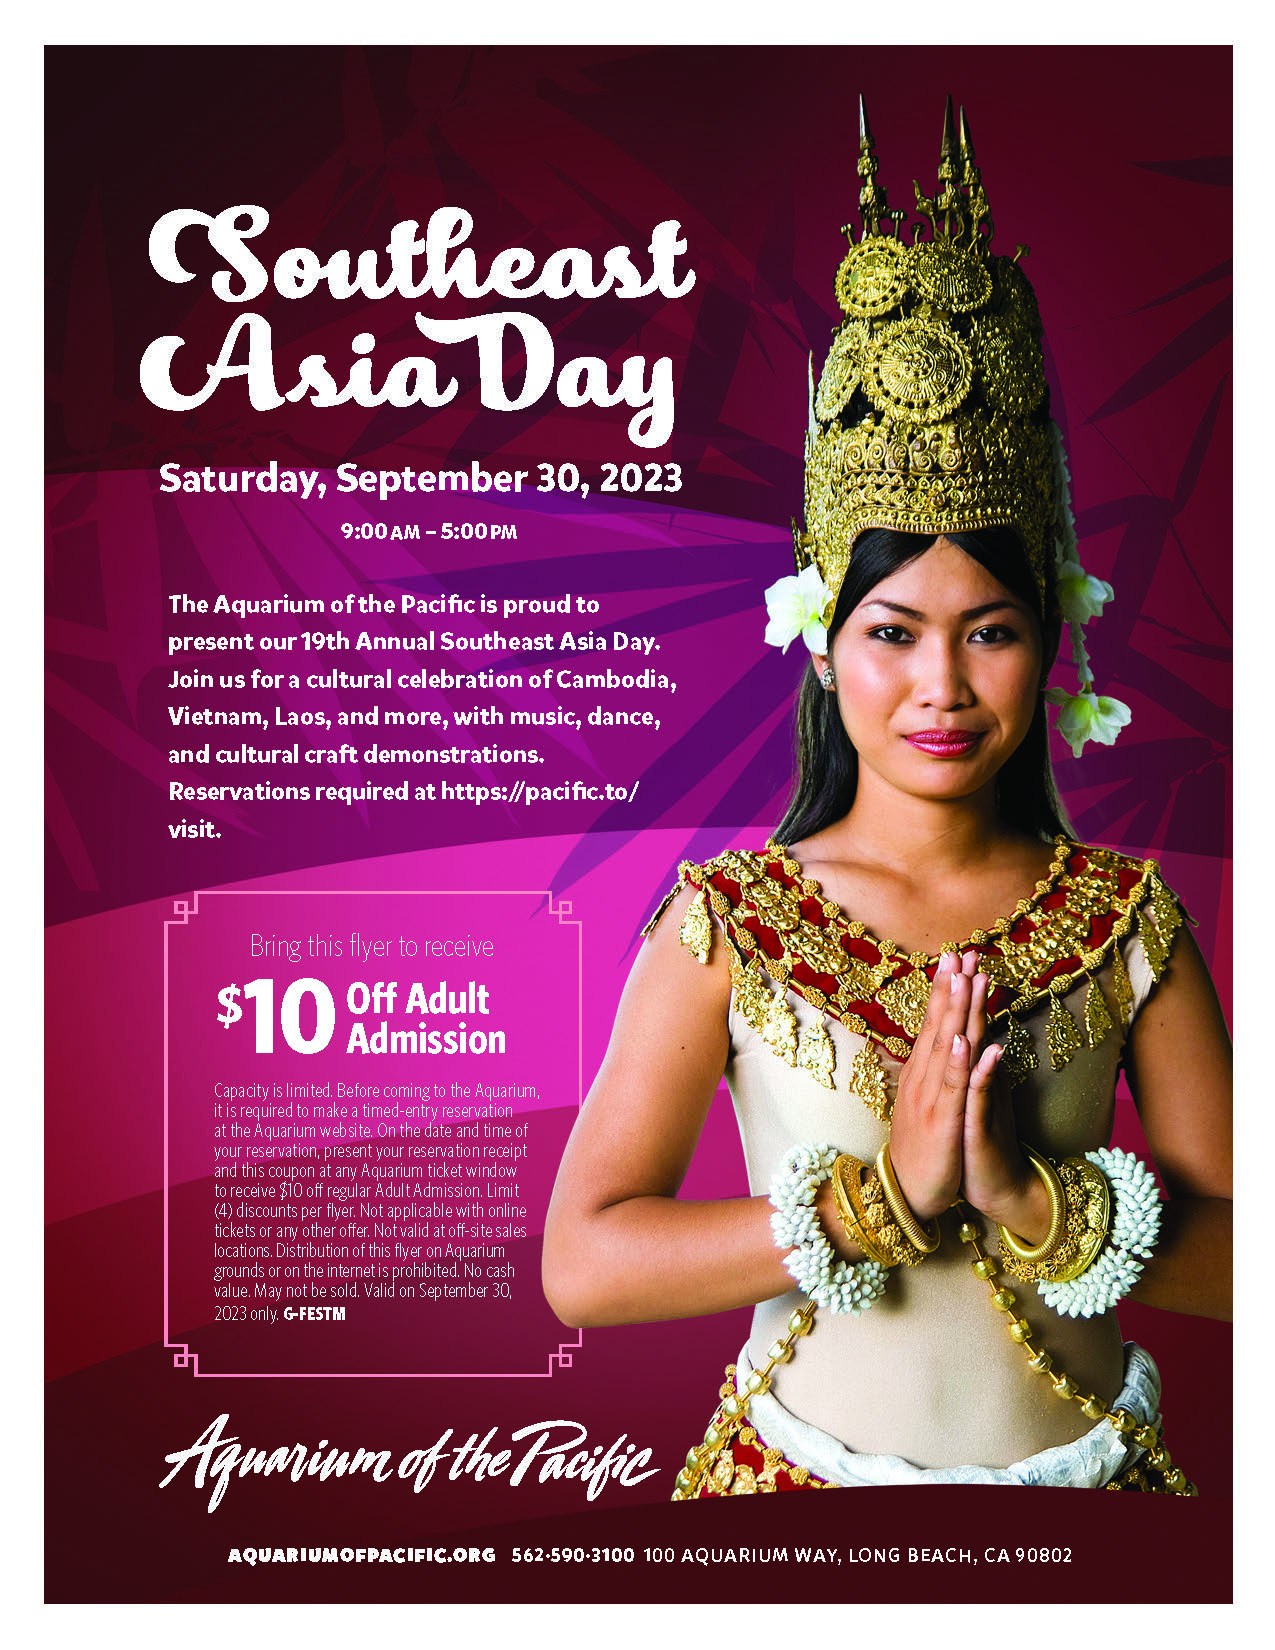 Southeast Asia Day at Aquarium of the Pacific – Saturday, September 30, 2023